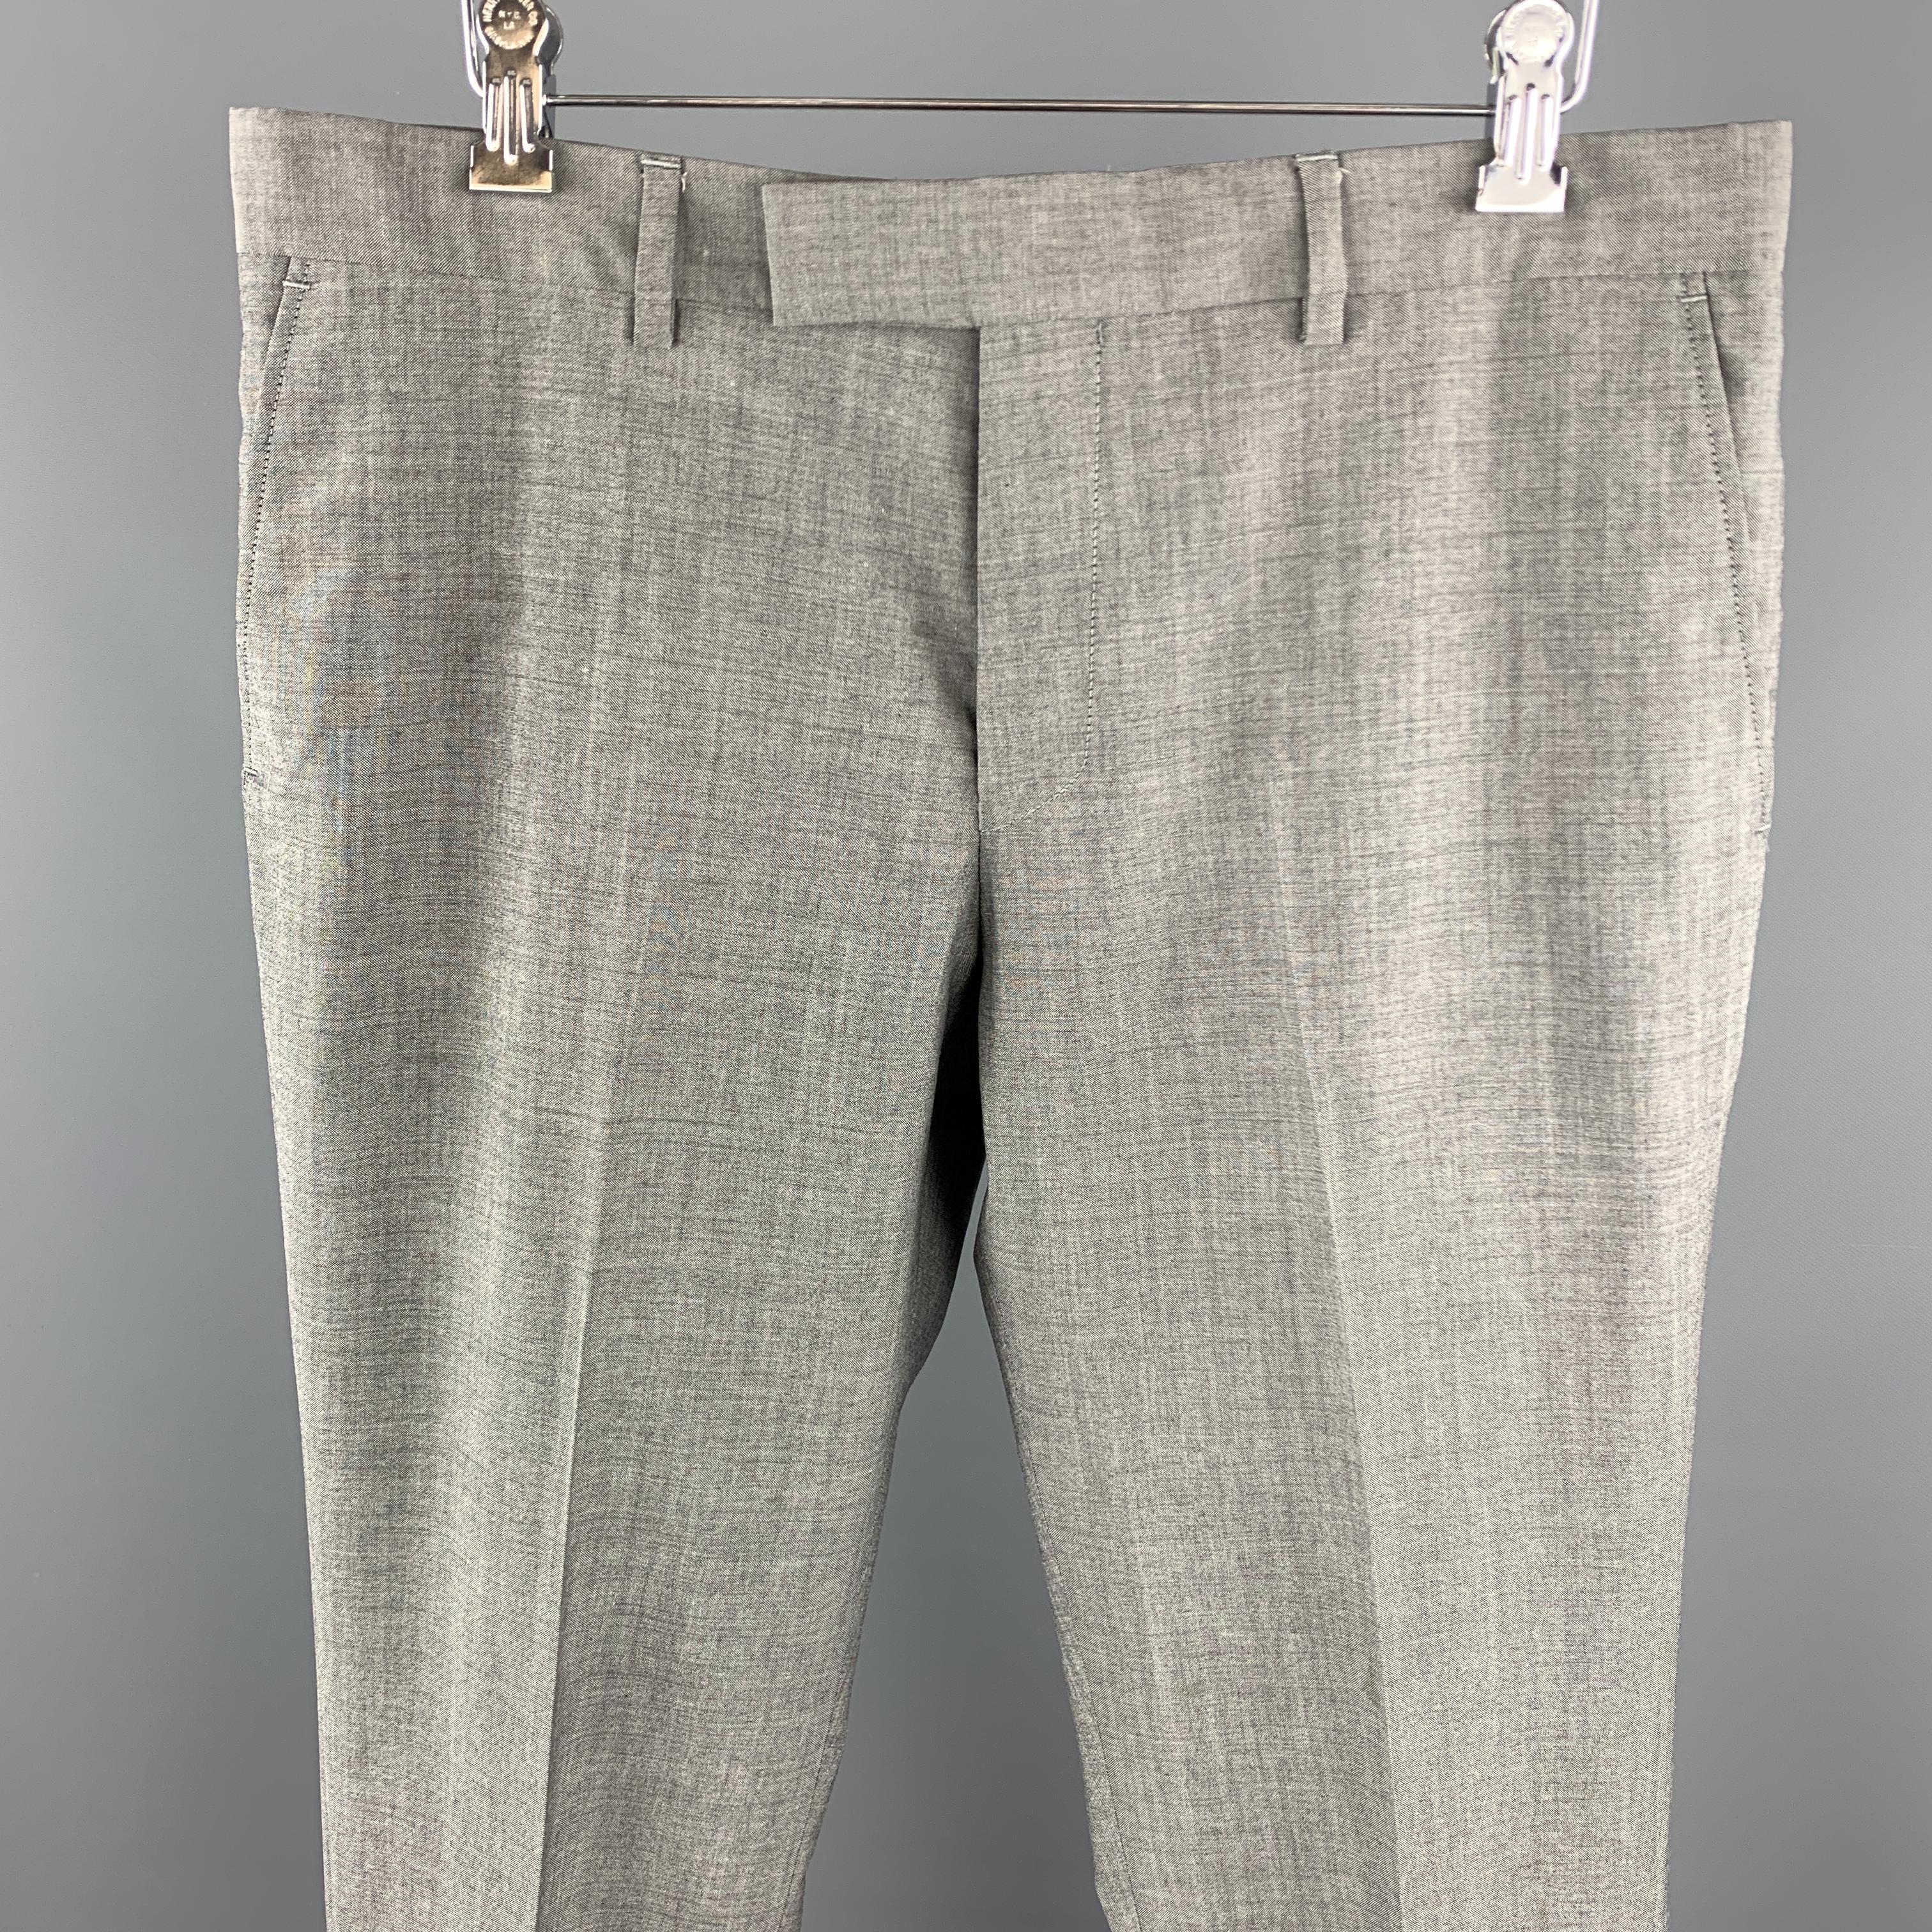 PAUL SMITH dress pants come in a light weight heathered gray wool with a flat front and tab waistband.

Excellent Pre-Owned Condition.
Marked: 32